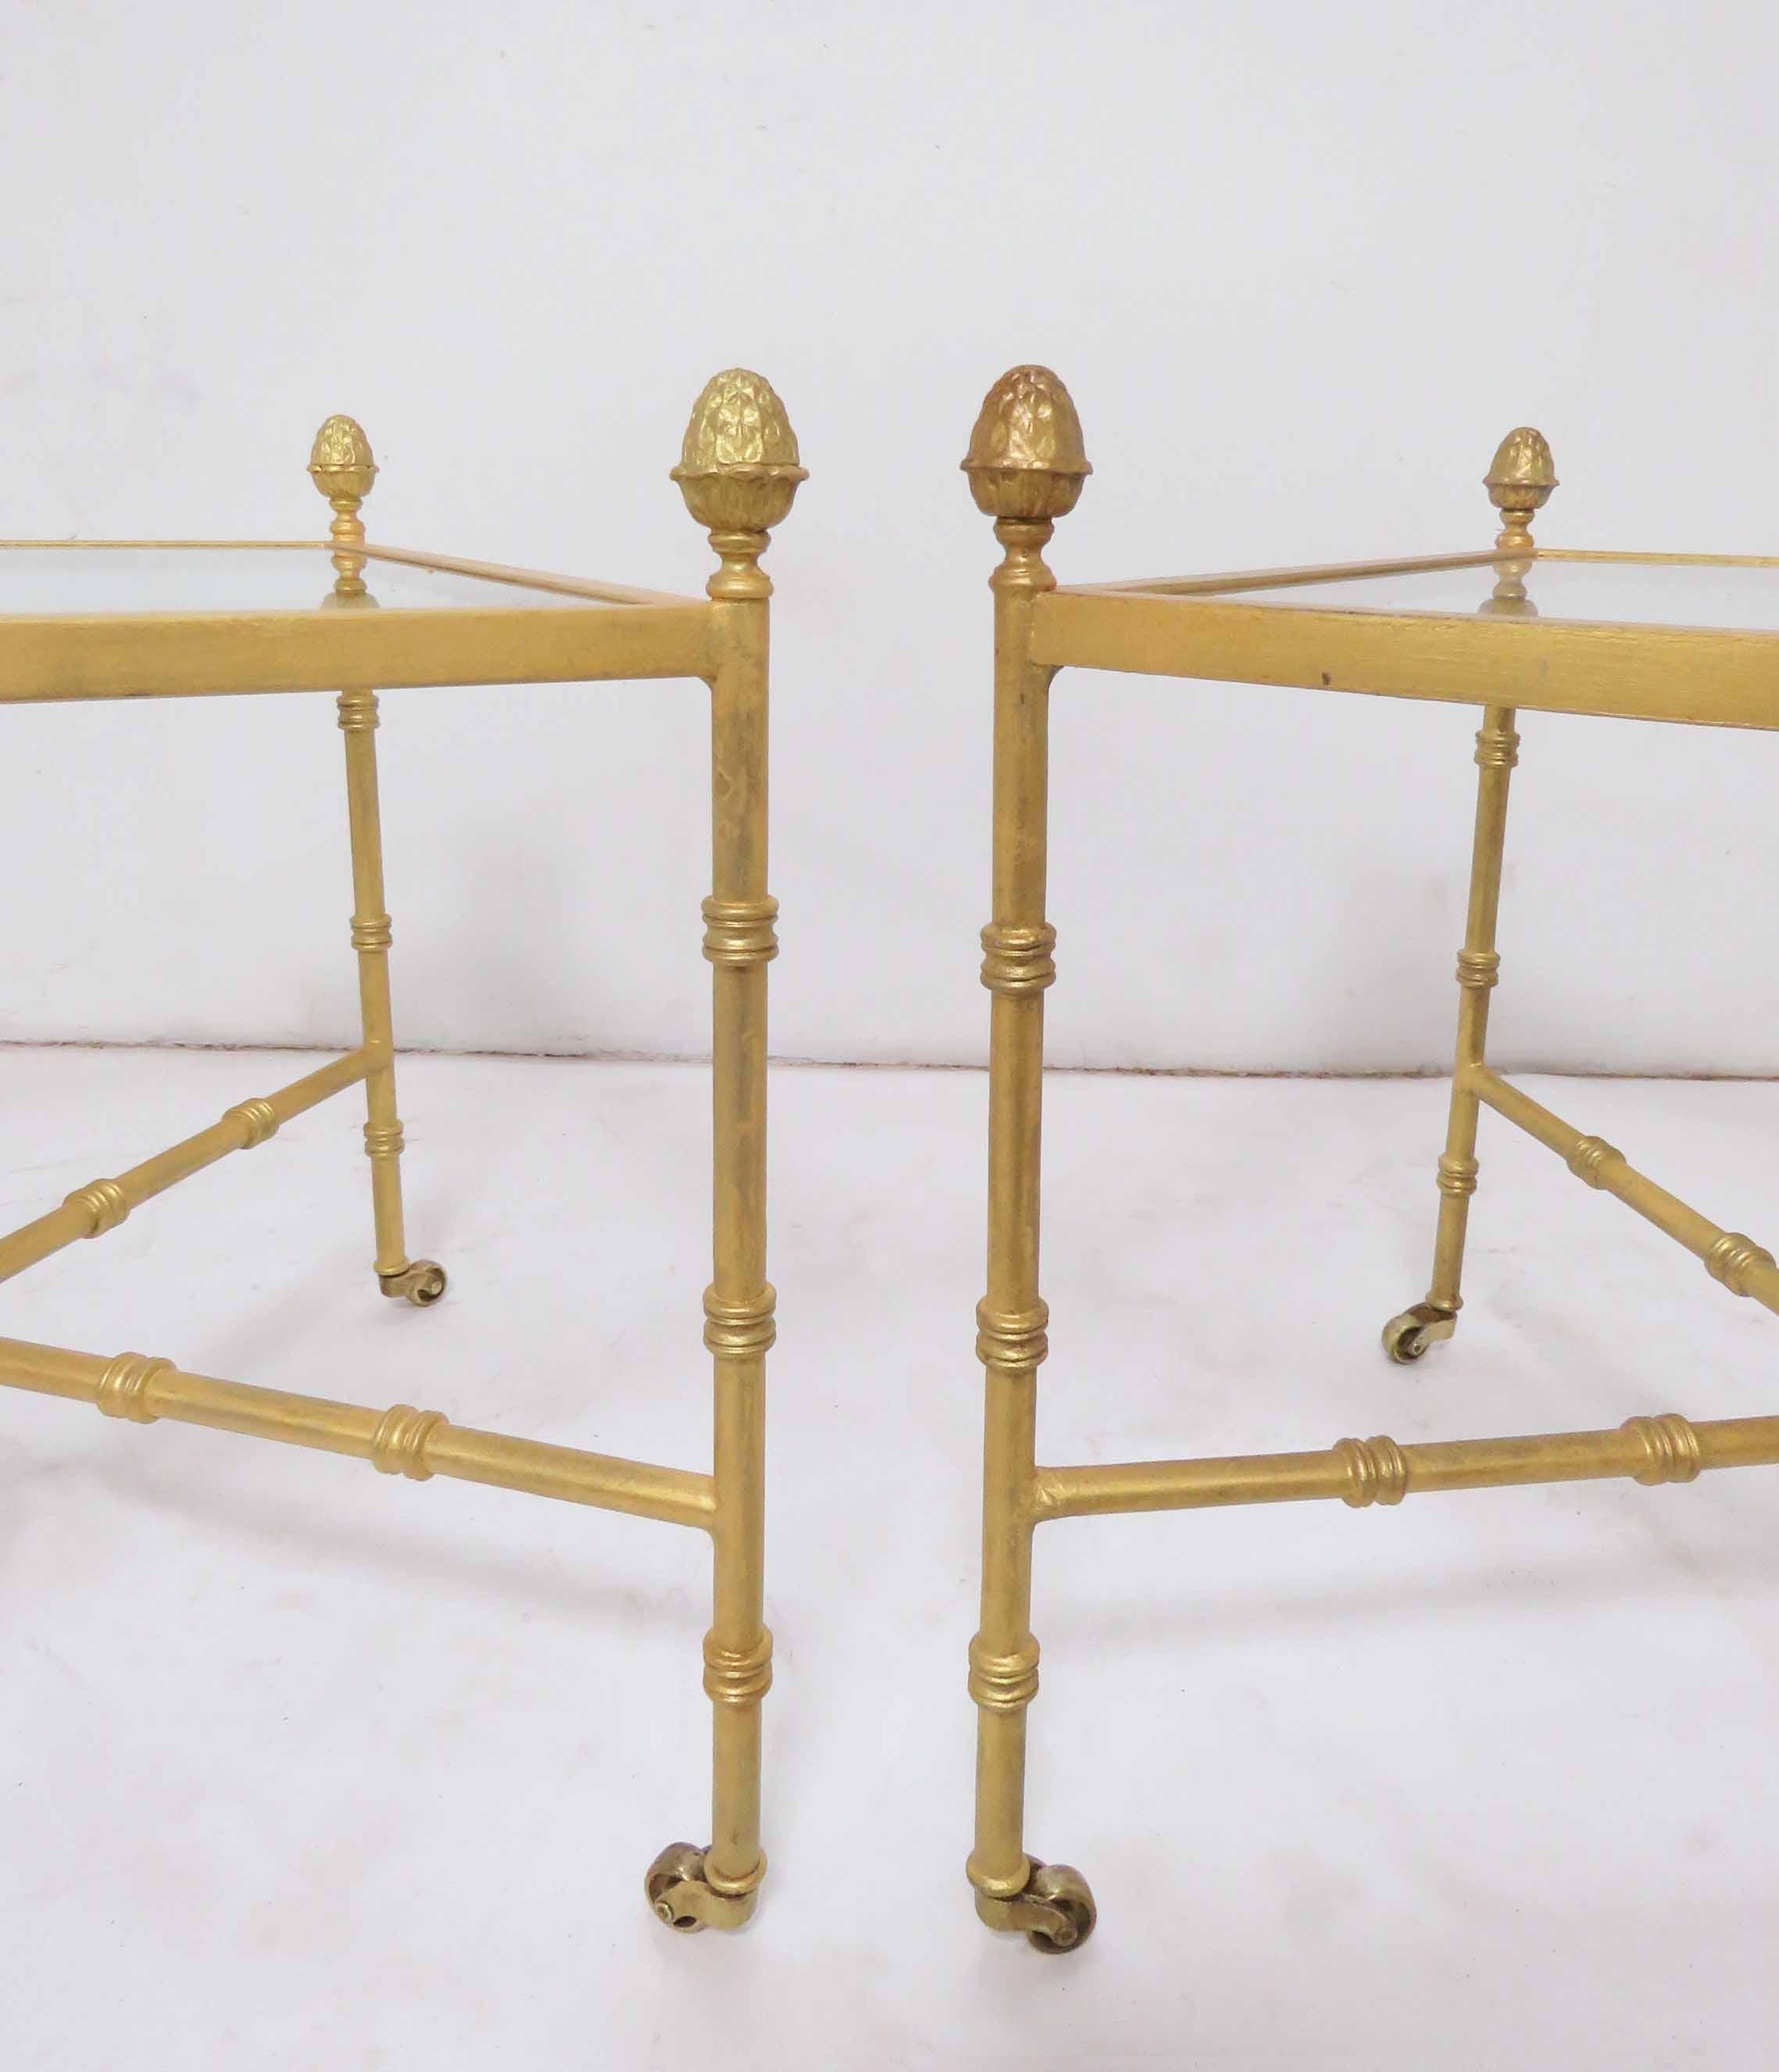 Hollywood Regency Pair of Maison Baguès Style Gilt End Tables with X-Stretchers and Acorn Finials